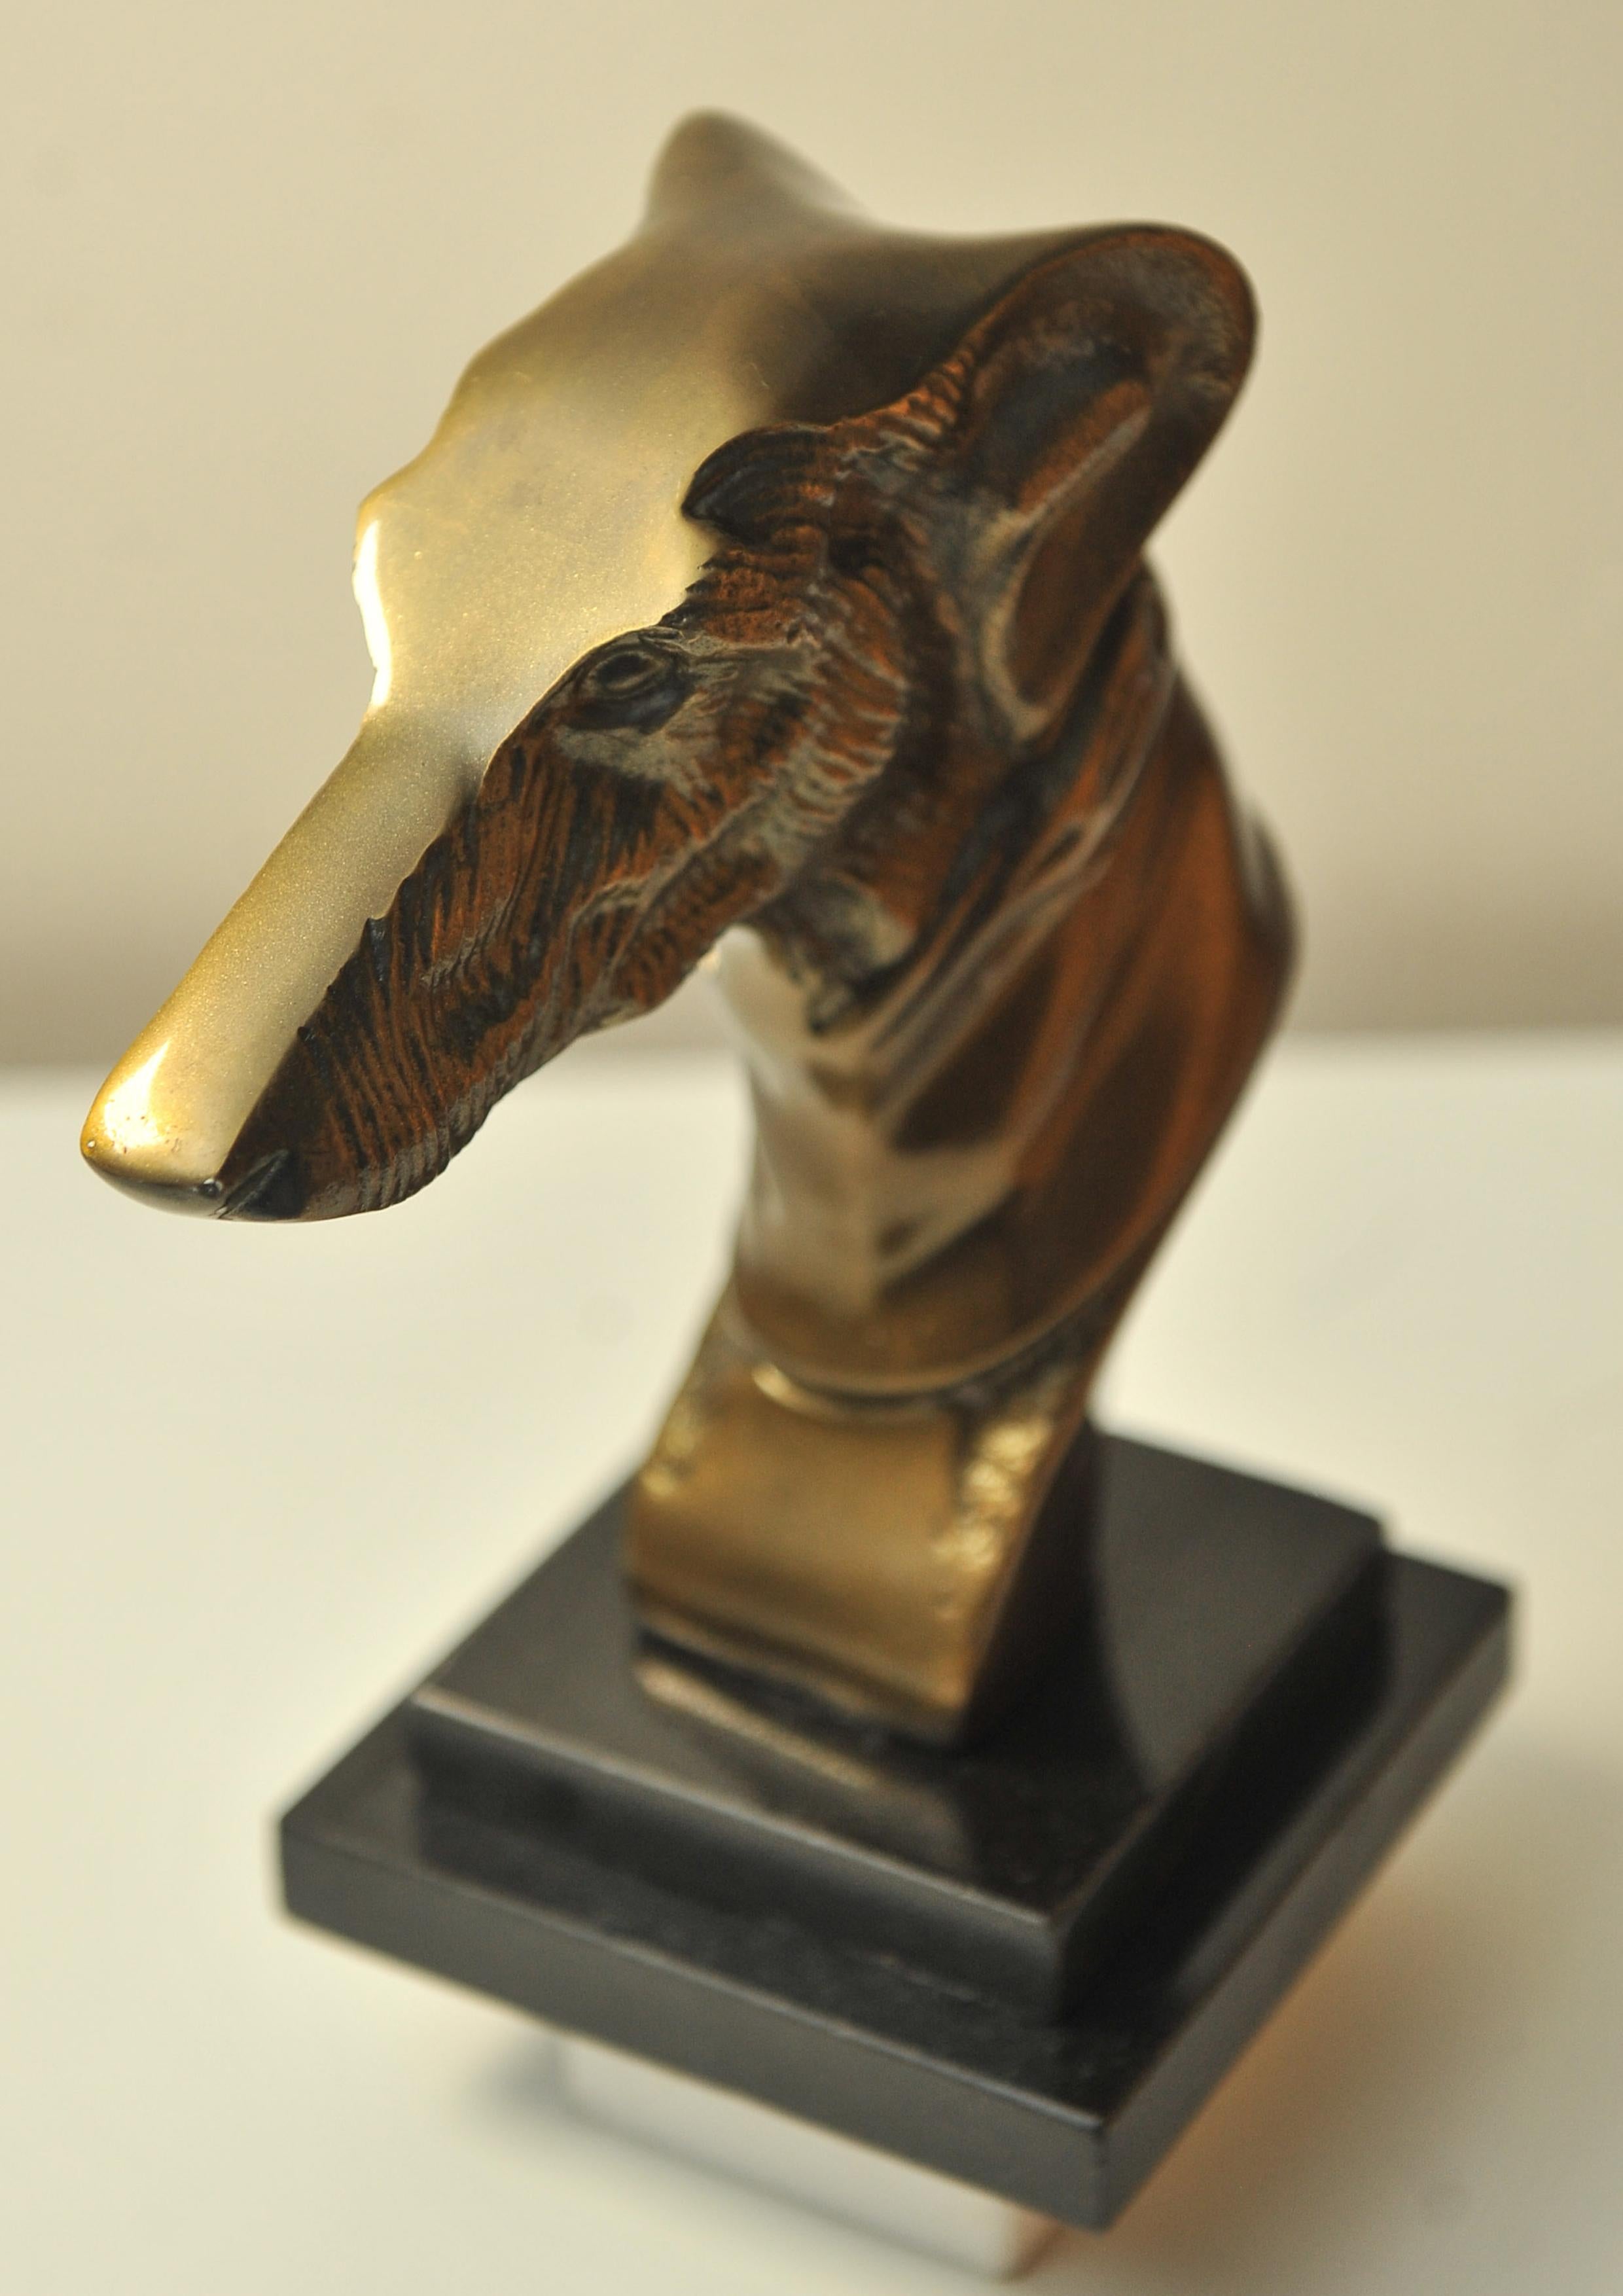 Greyhound Bronze Figurehead On Plinth Ideal For Desk Paperweight Or Decoration.
Good Christmas Gift